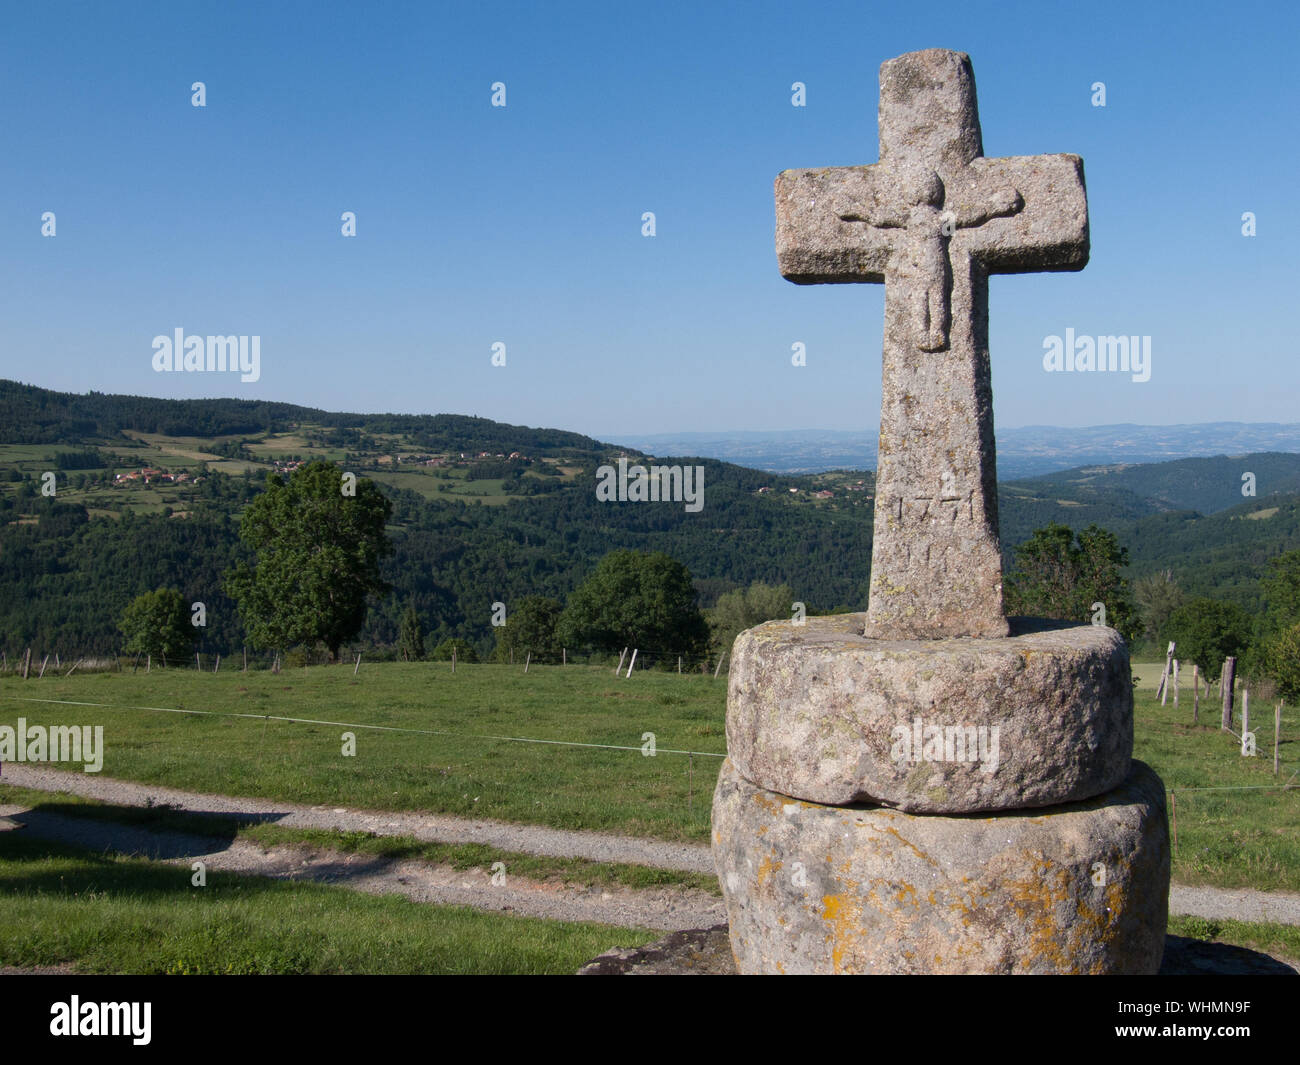 Old Christian Cross In The Countryside Stock Photo